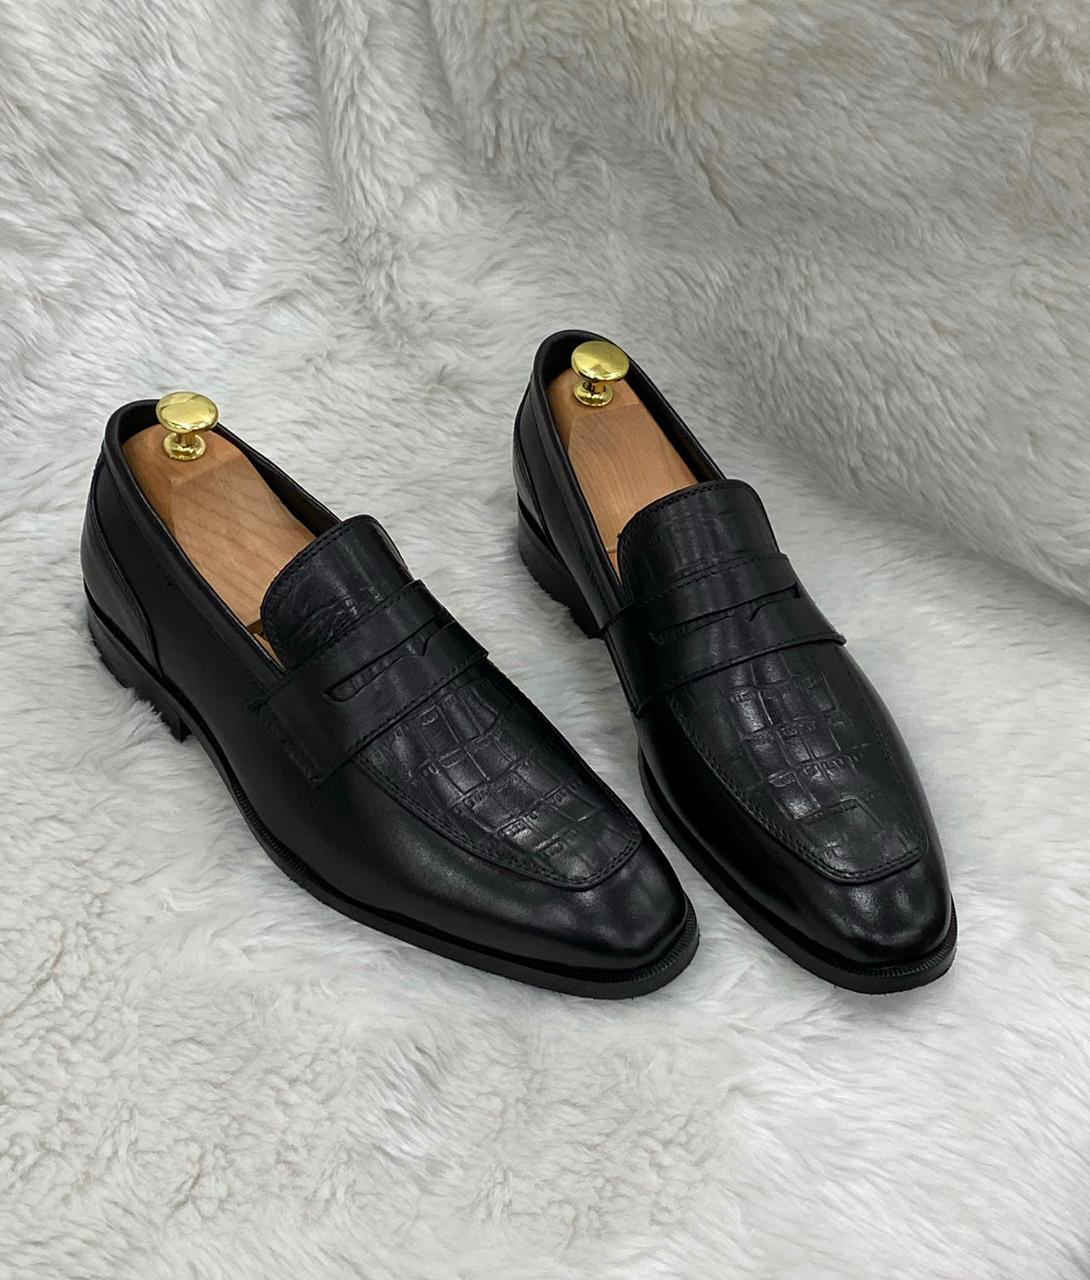 Stylish Leather Patent Slipons With Tassles For Men-Unique and Classy